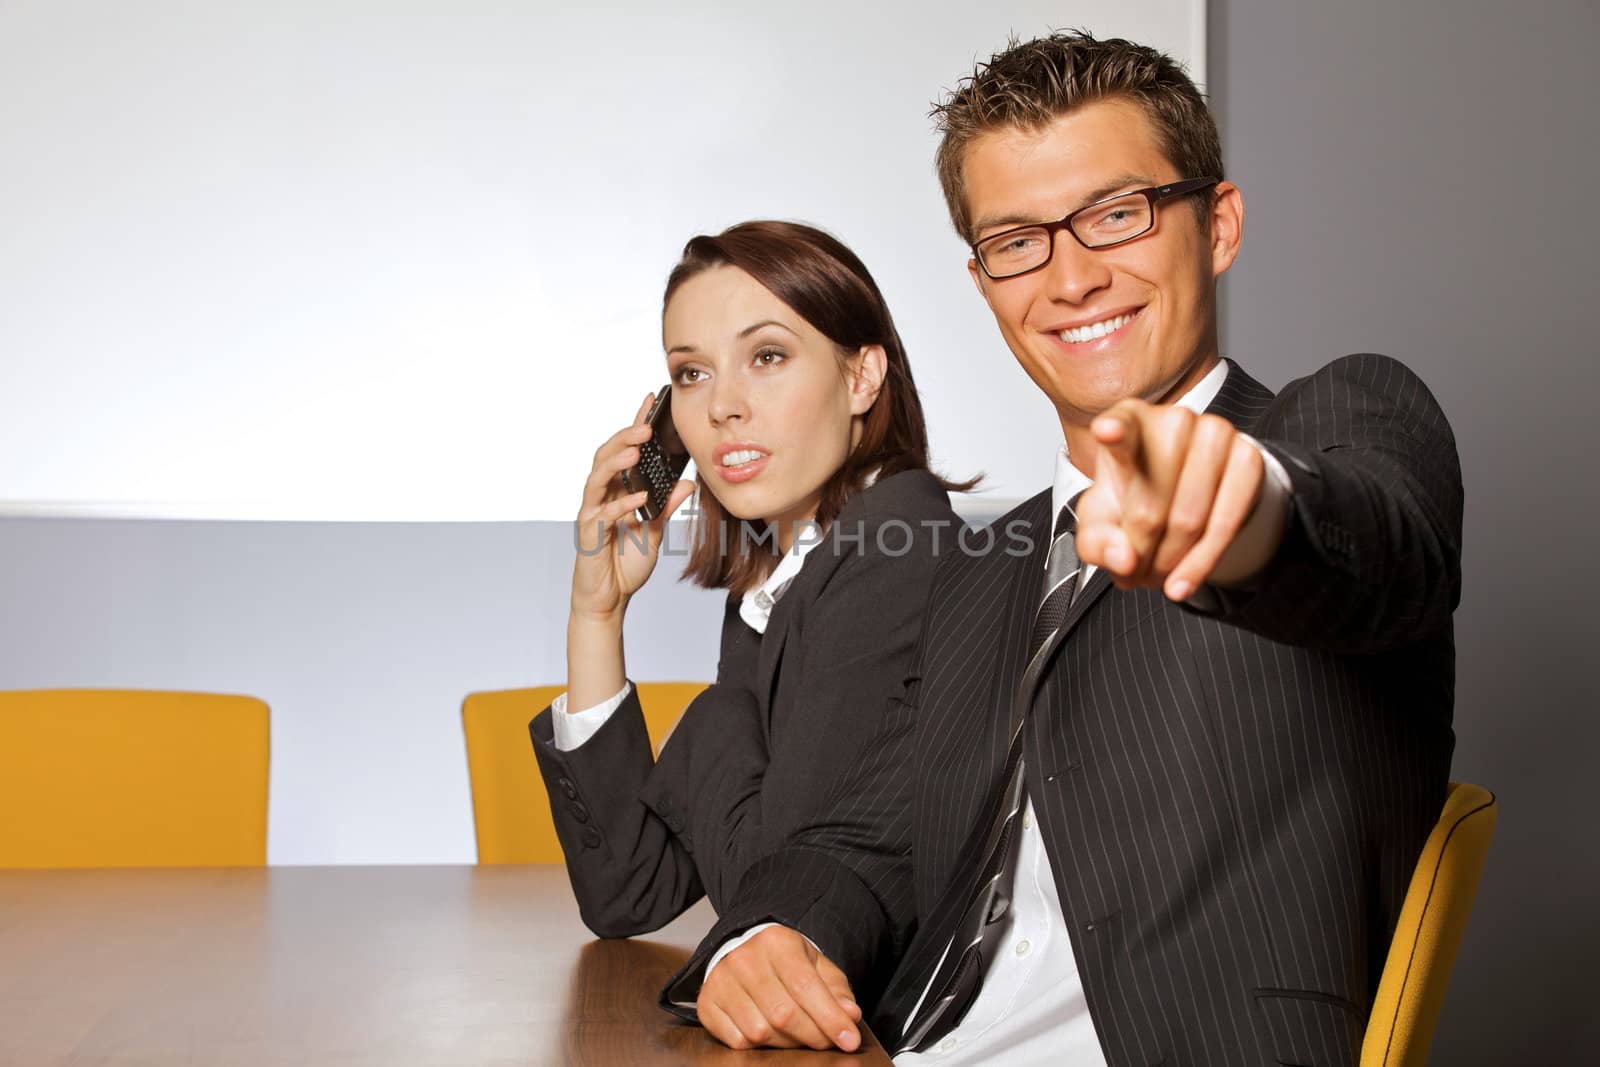 Portrait of businessman pointing while businesswoman using mobile phone
